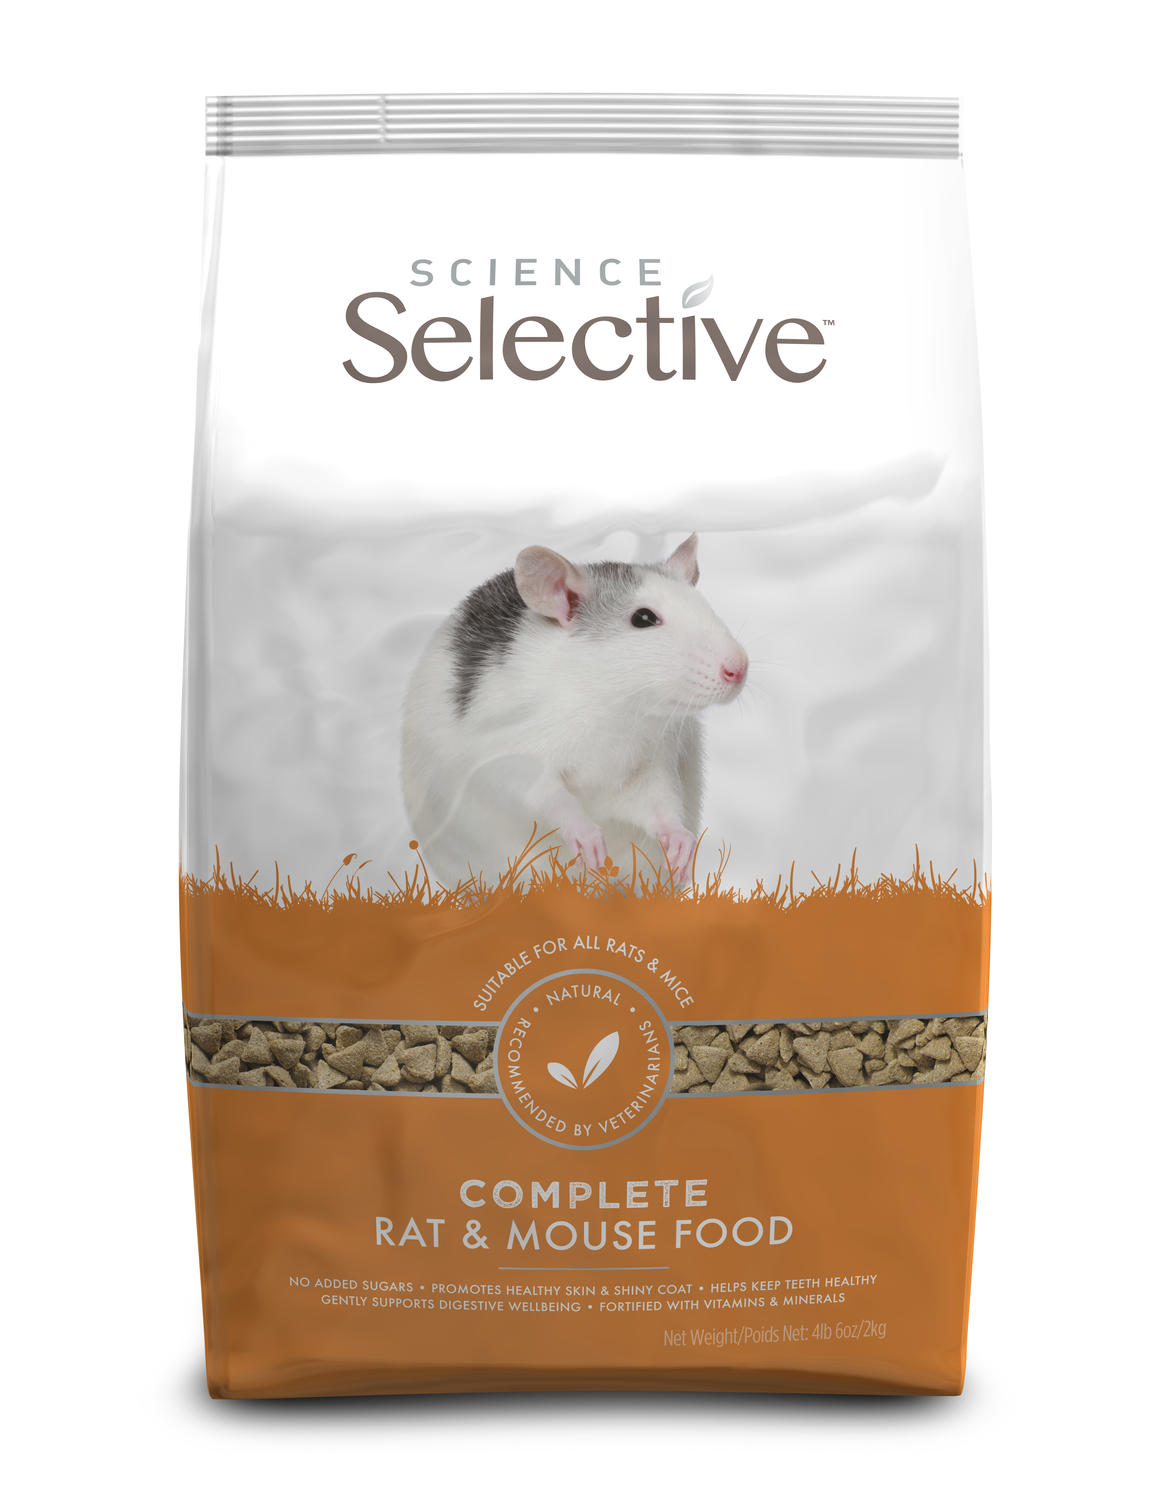 4 Lb 6 oz. Supreme Science Selective Rat & Mouse - Health/First Aid